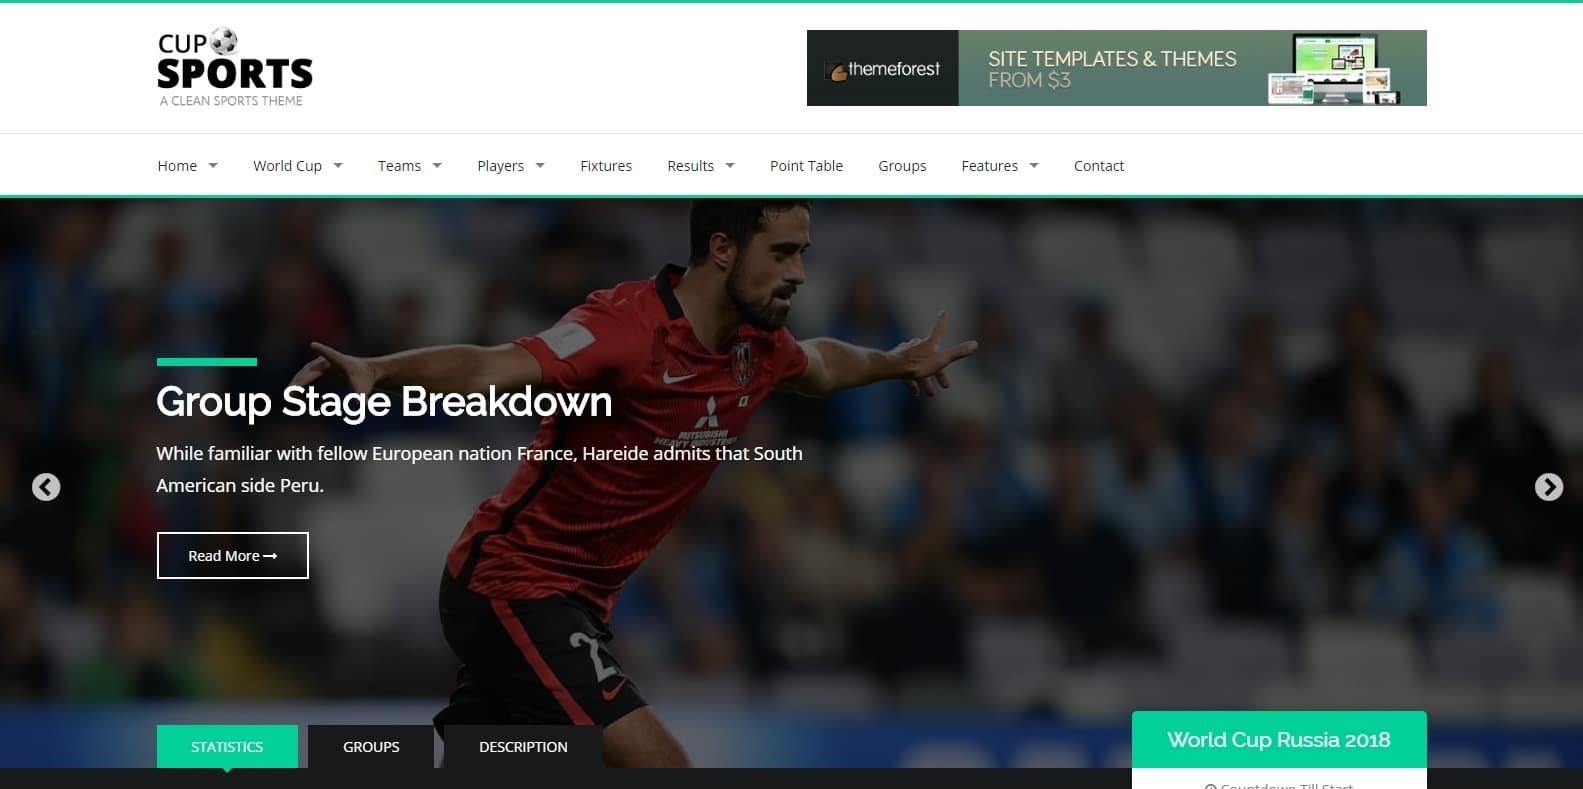 sportscup-sports-website-template